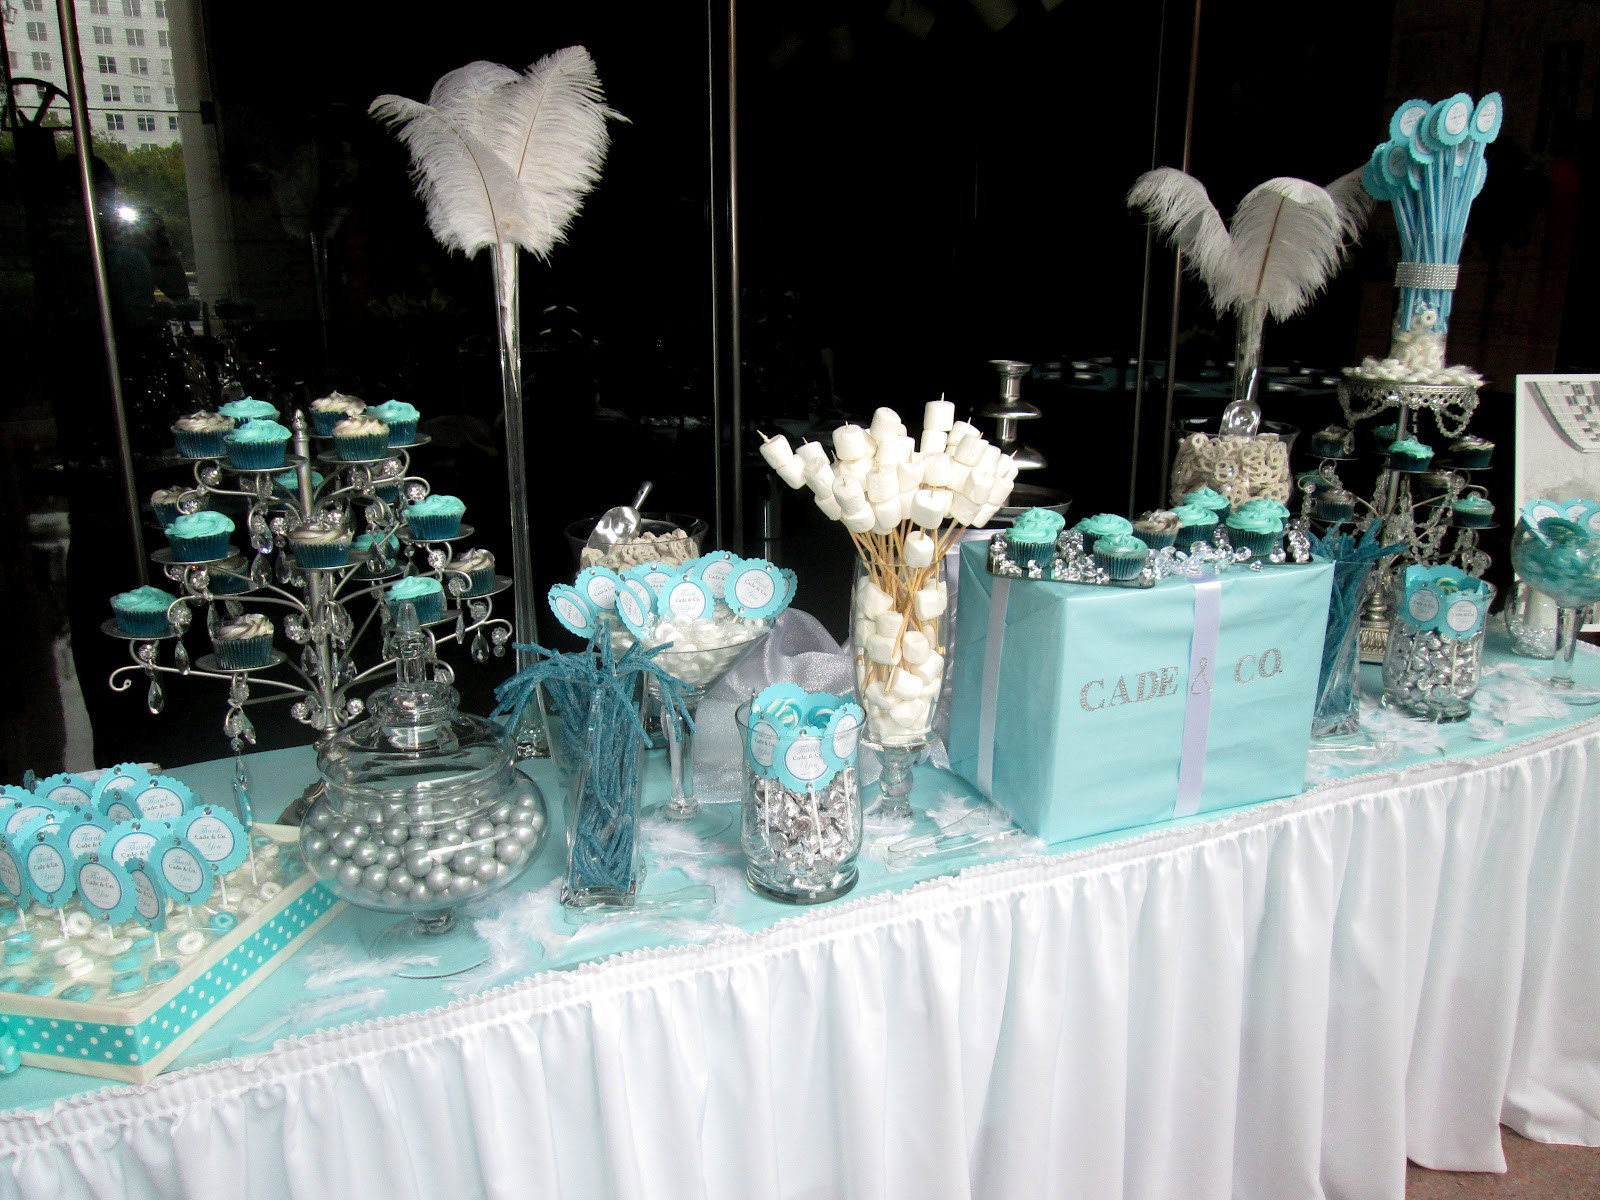 Tiffany And Co Wedding Theme
 Real College Student of Atlanta Tiffany & Co Themed